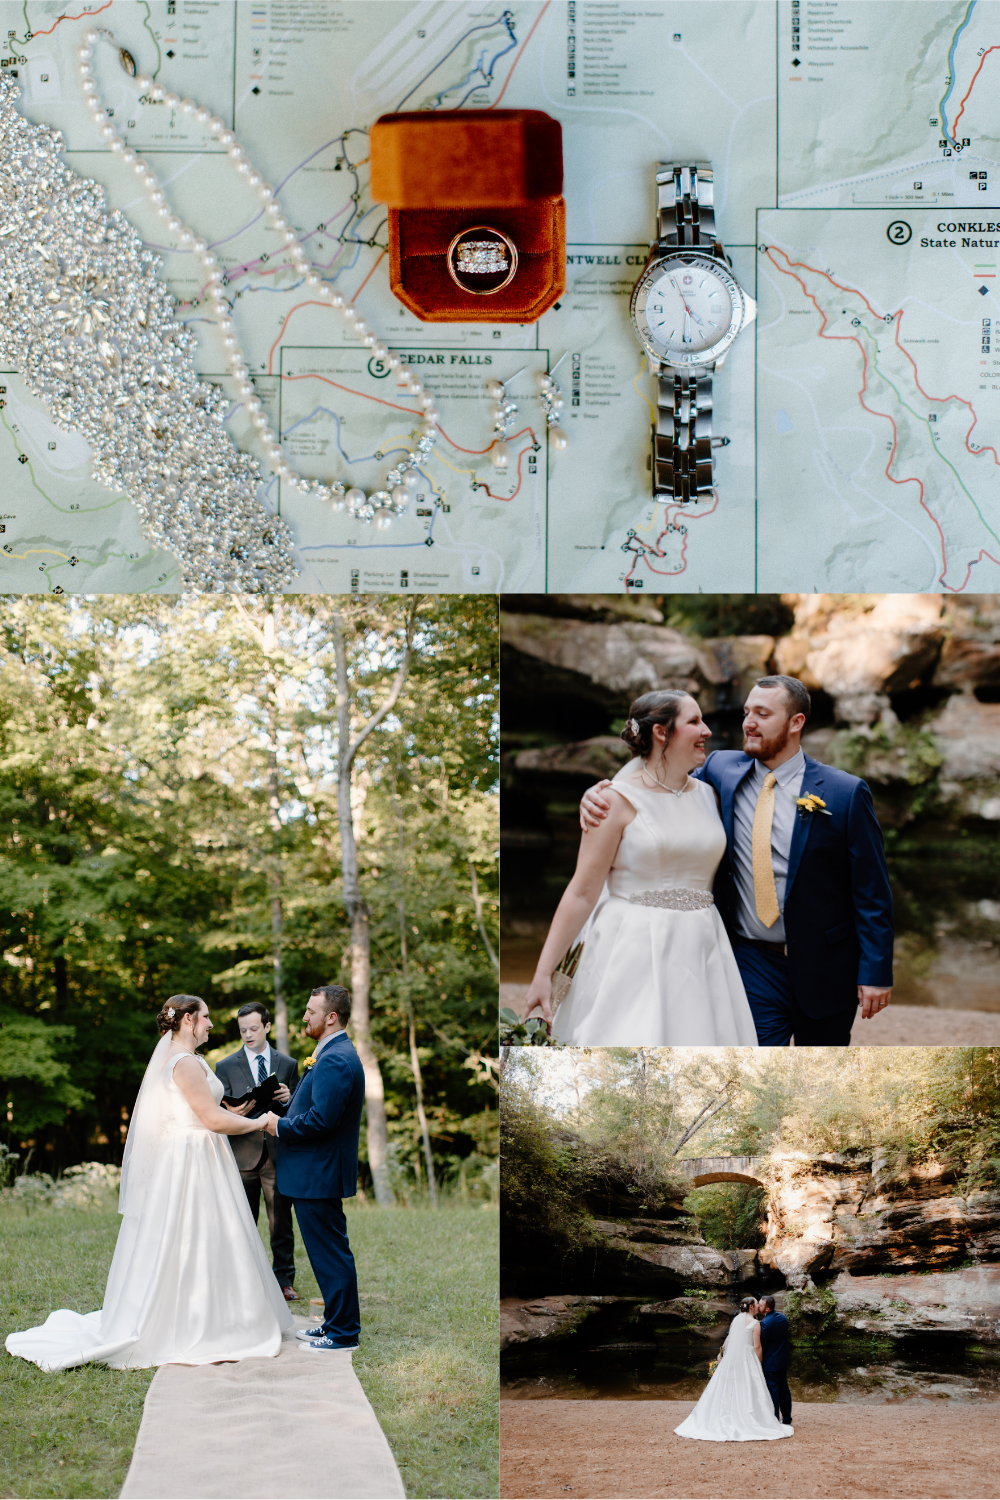 Destination wedding photographer for adventurous and fun couples. National park micro wedding in Hocking Hills, Ohio!